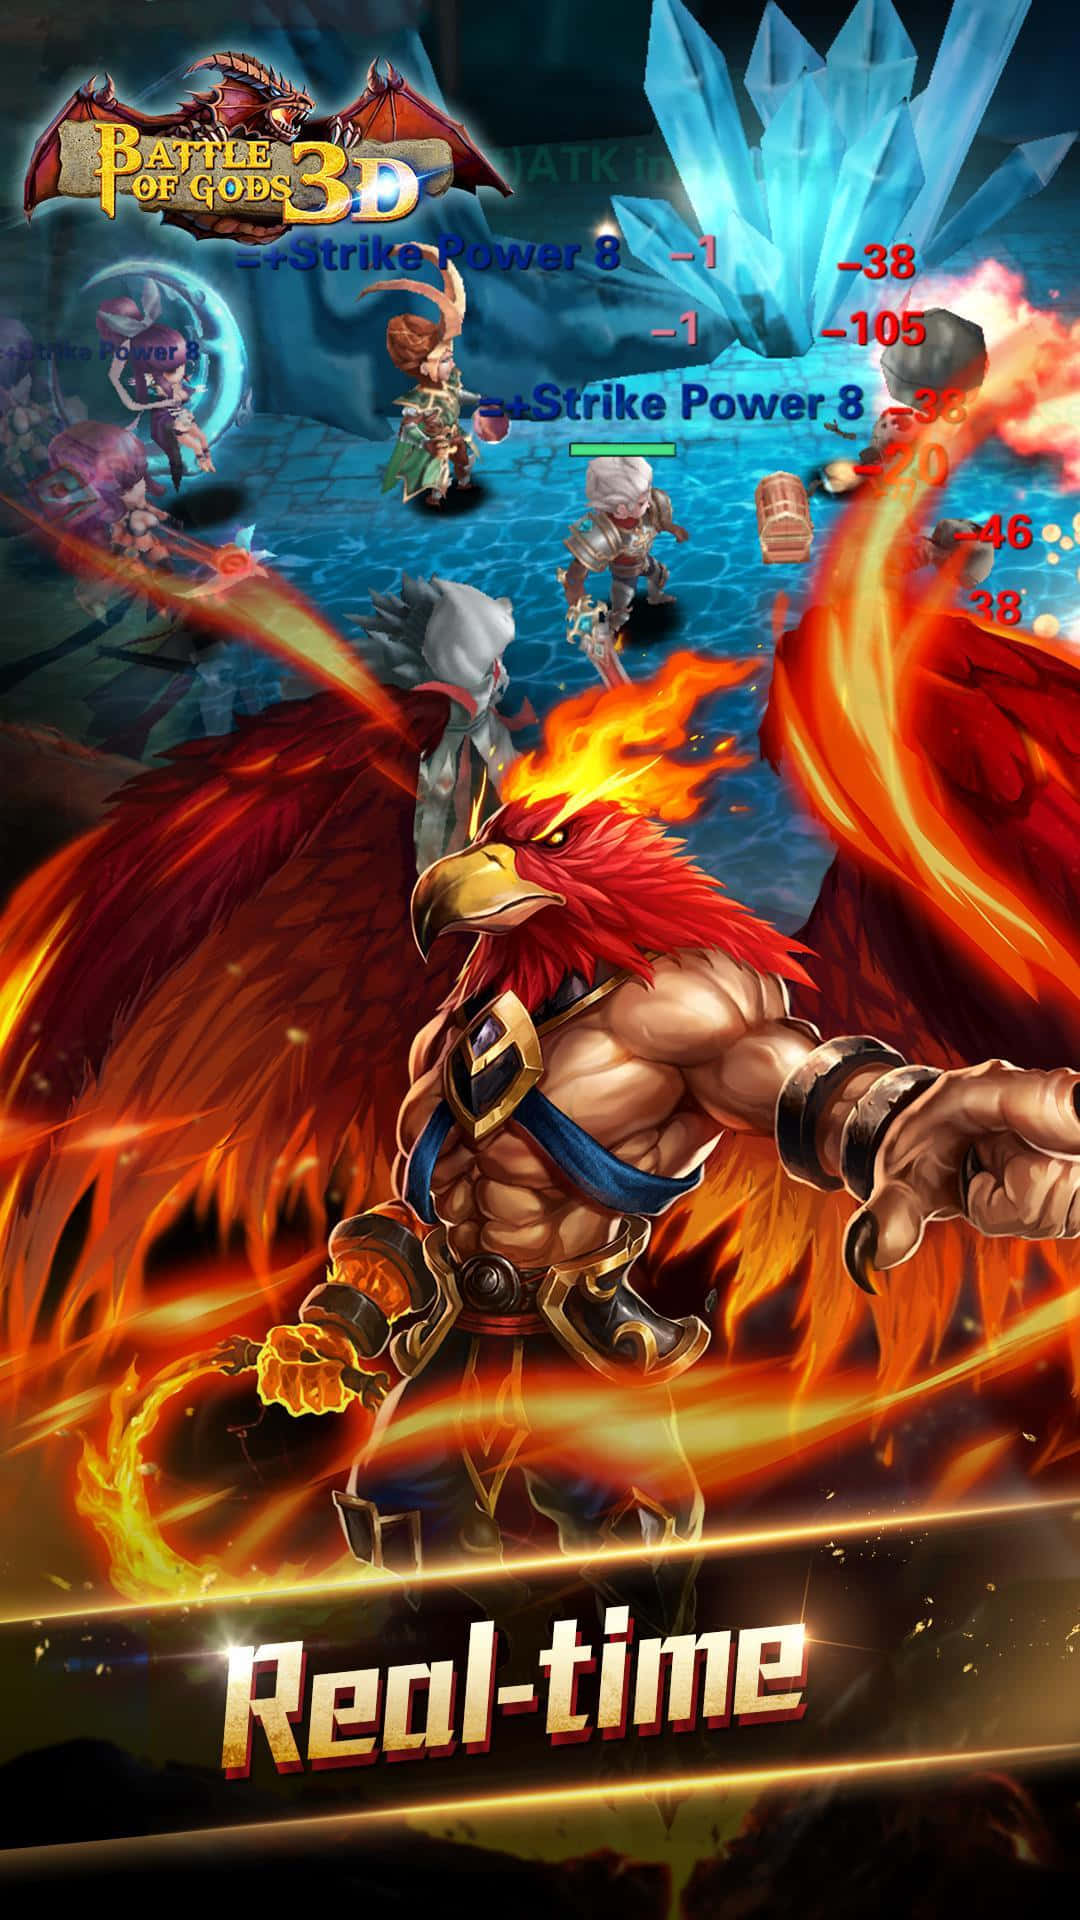 Battle Of Gods forces collide in epic fight Wallpaper